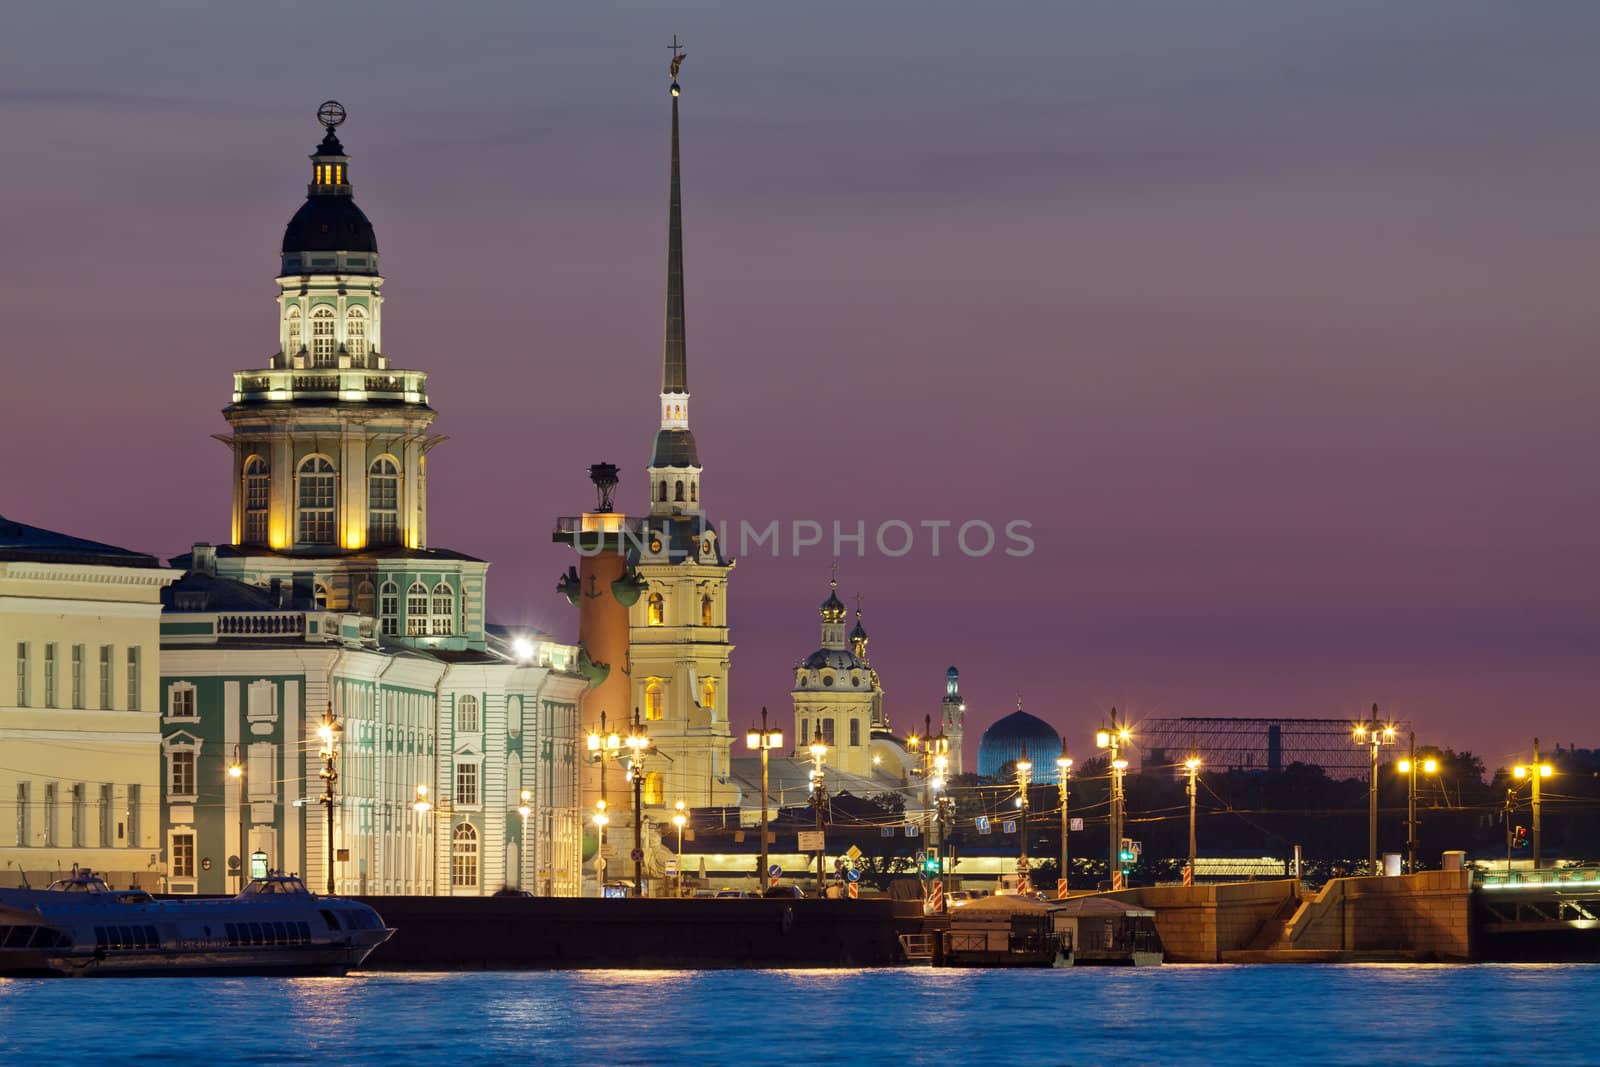 The iconic view of St. Petersburg White Nights by Antartis